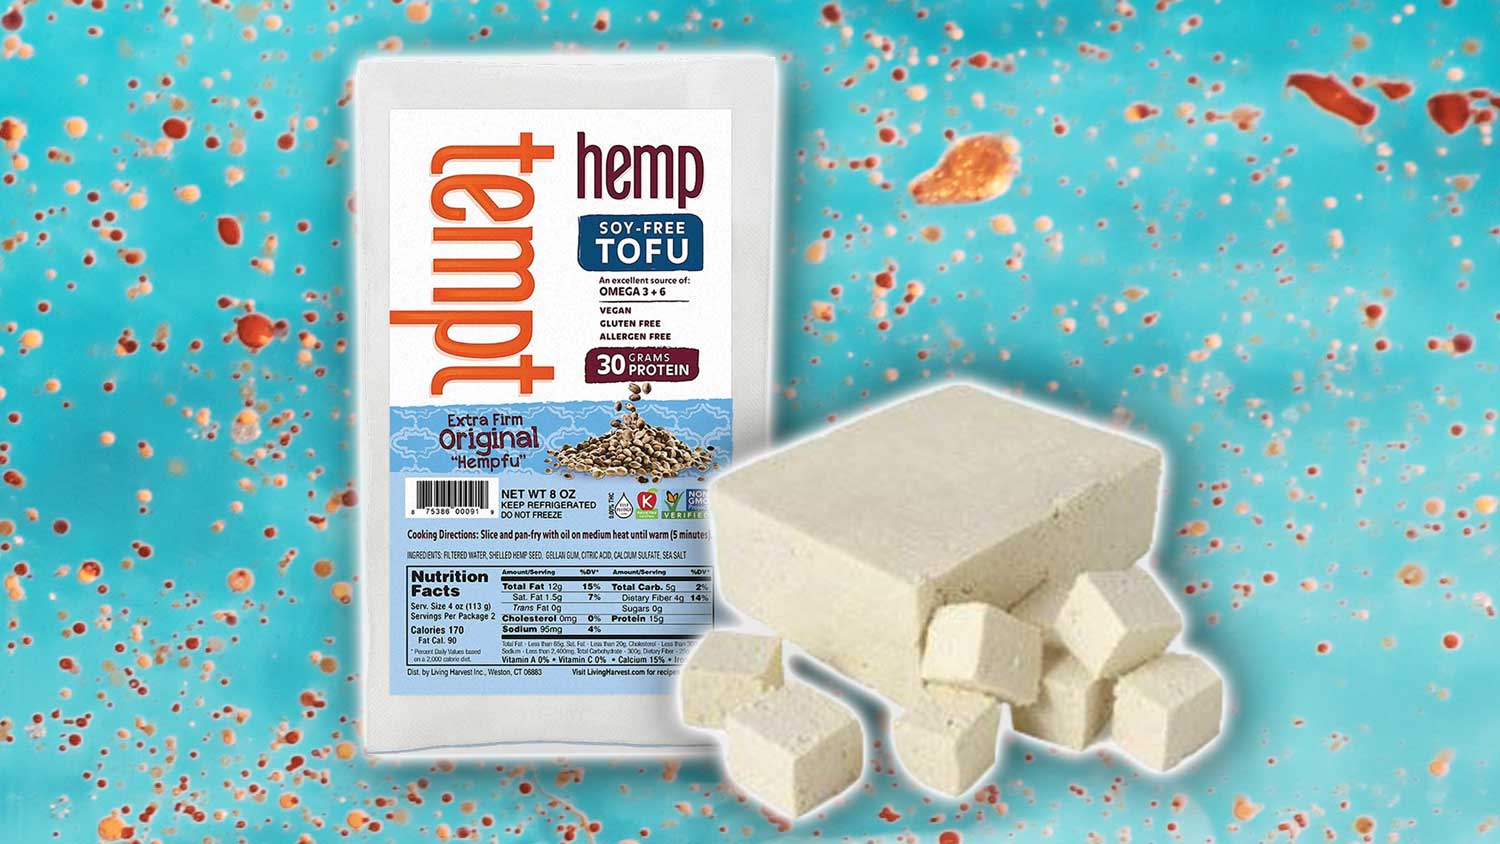 Hempfu Tofu Is Made Entirely Out of Hemp Seeds